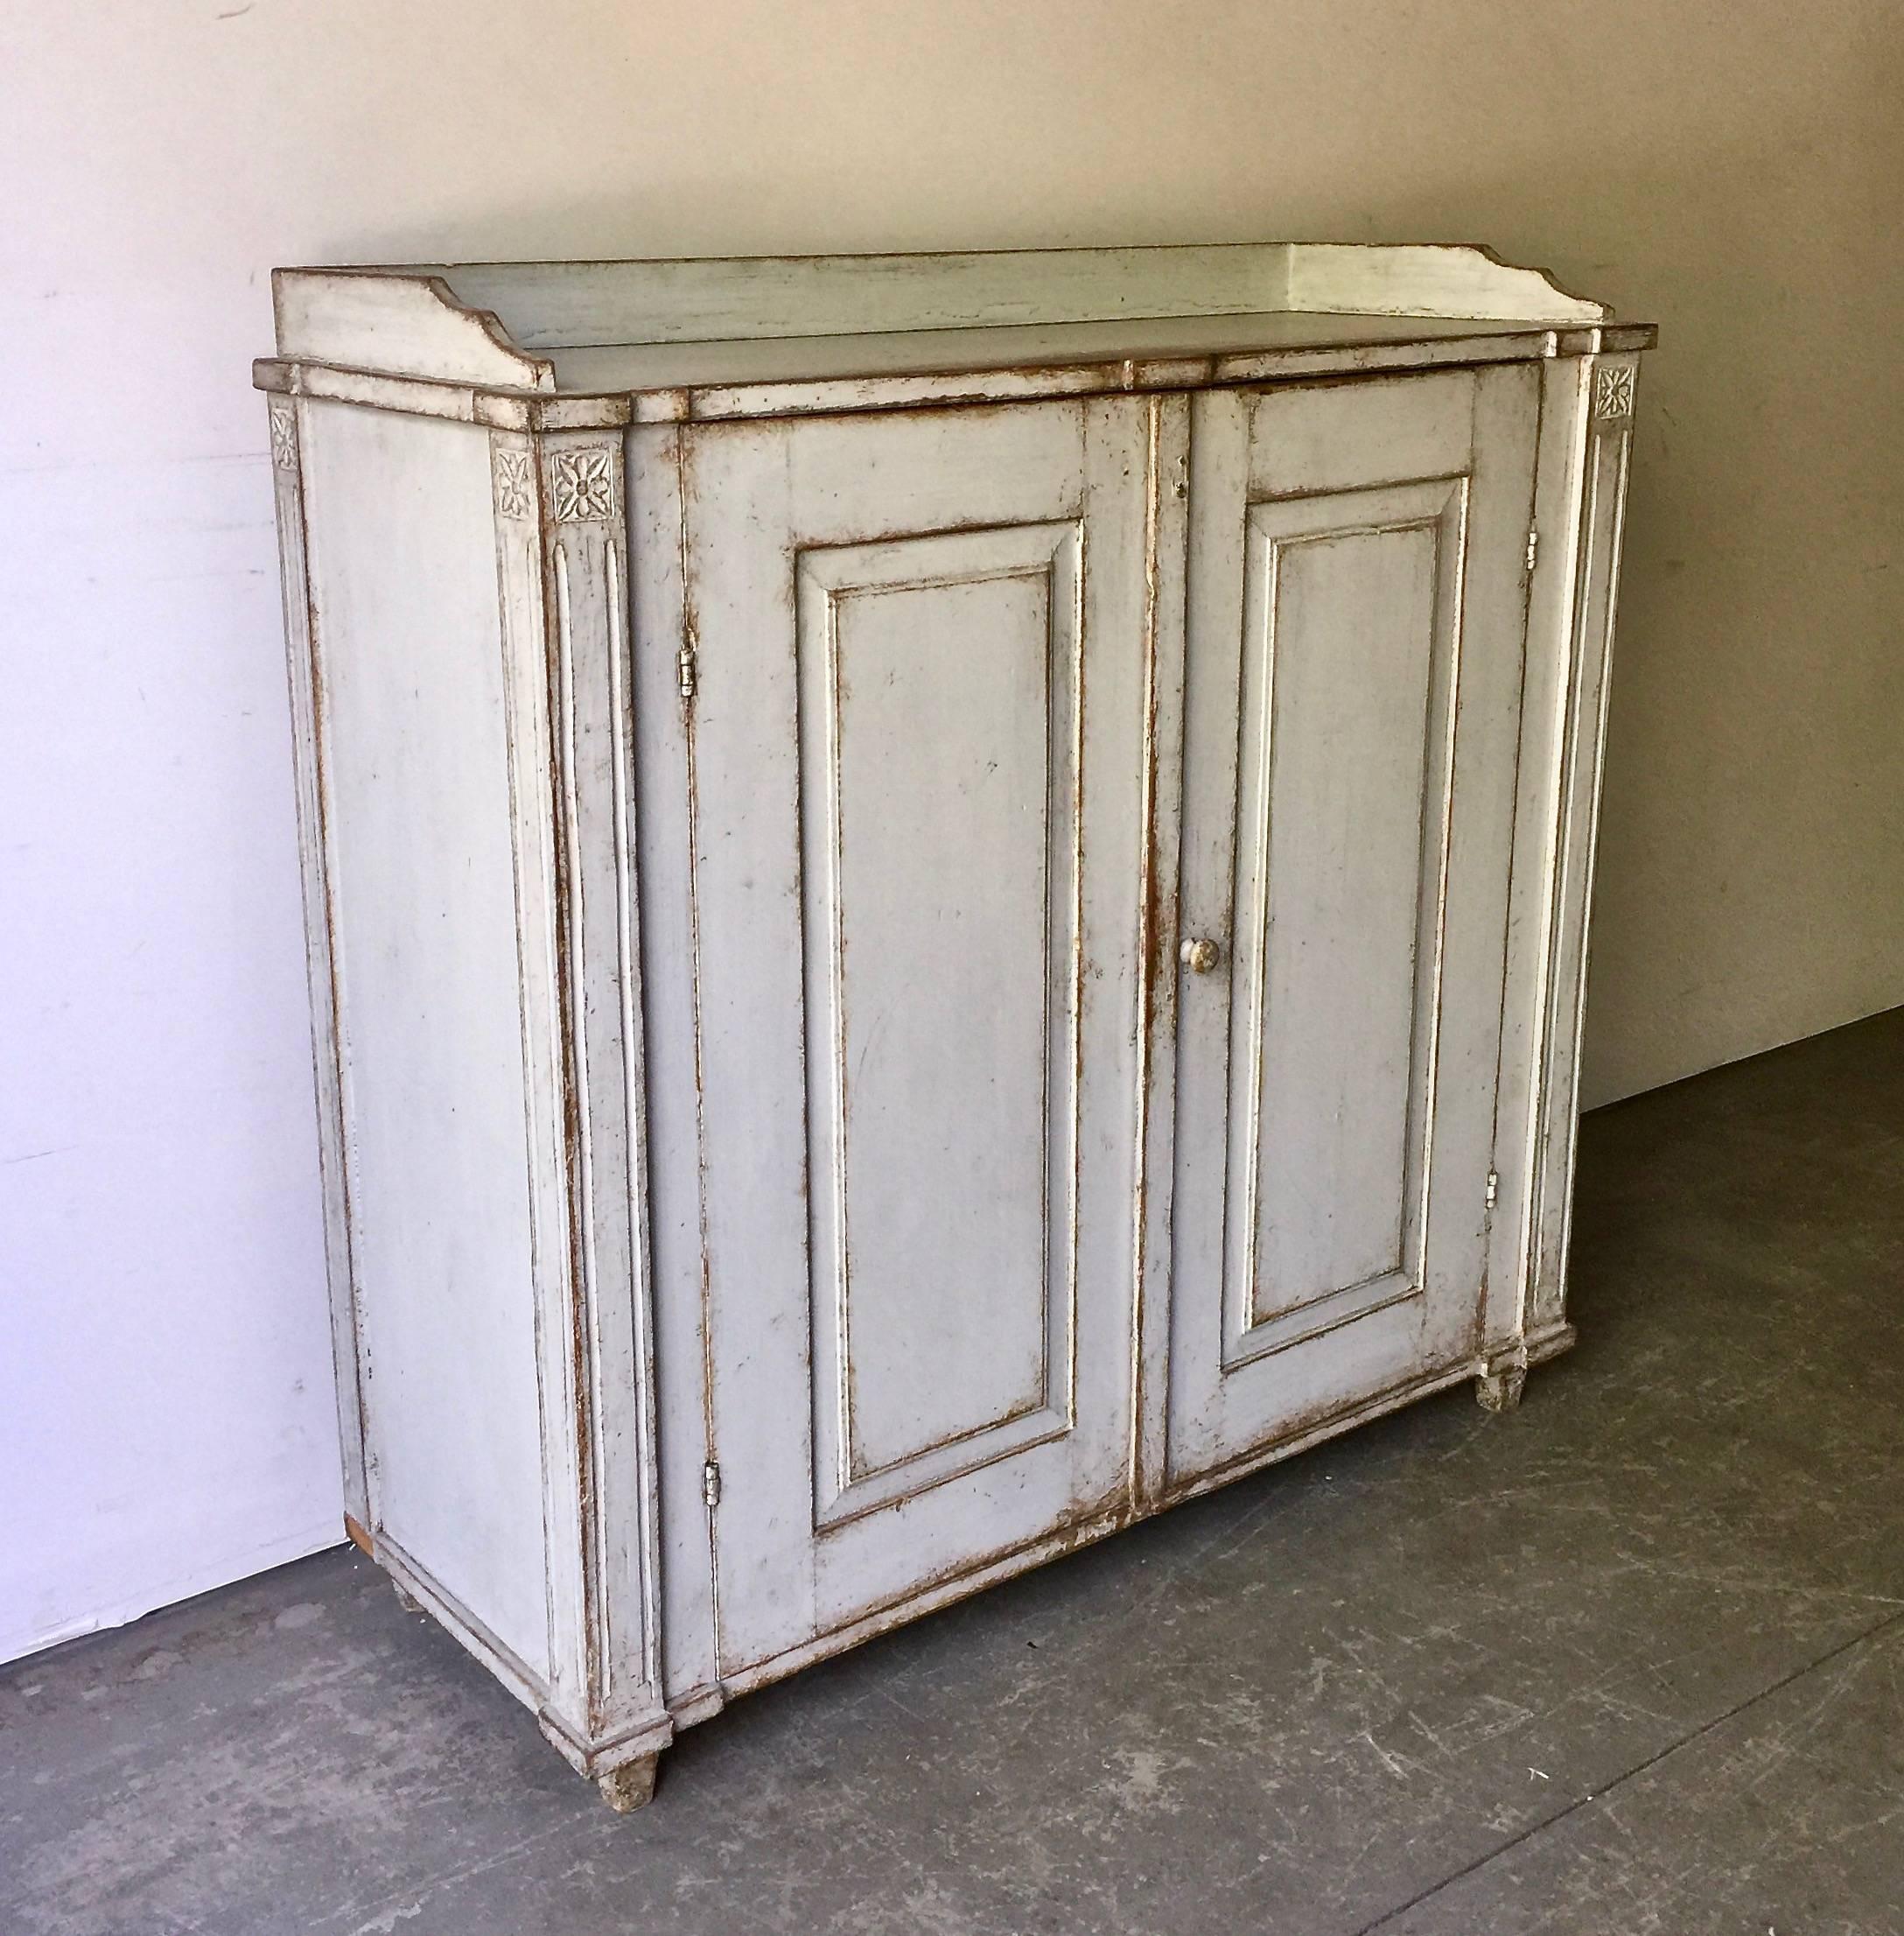 Period Gustavian sideboard, circa 1810, Sweden with wonderful worn pale blue and grey patina. Classic proportions with carved panel doors, carved side posts with charming rosettes, gallery wooden top and tapered feet. Original hardwares.
More than